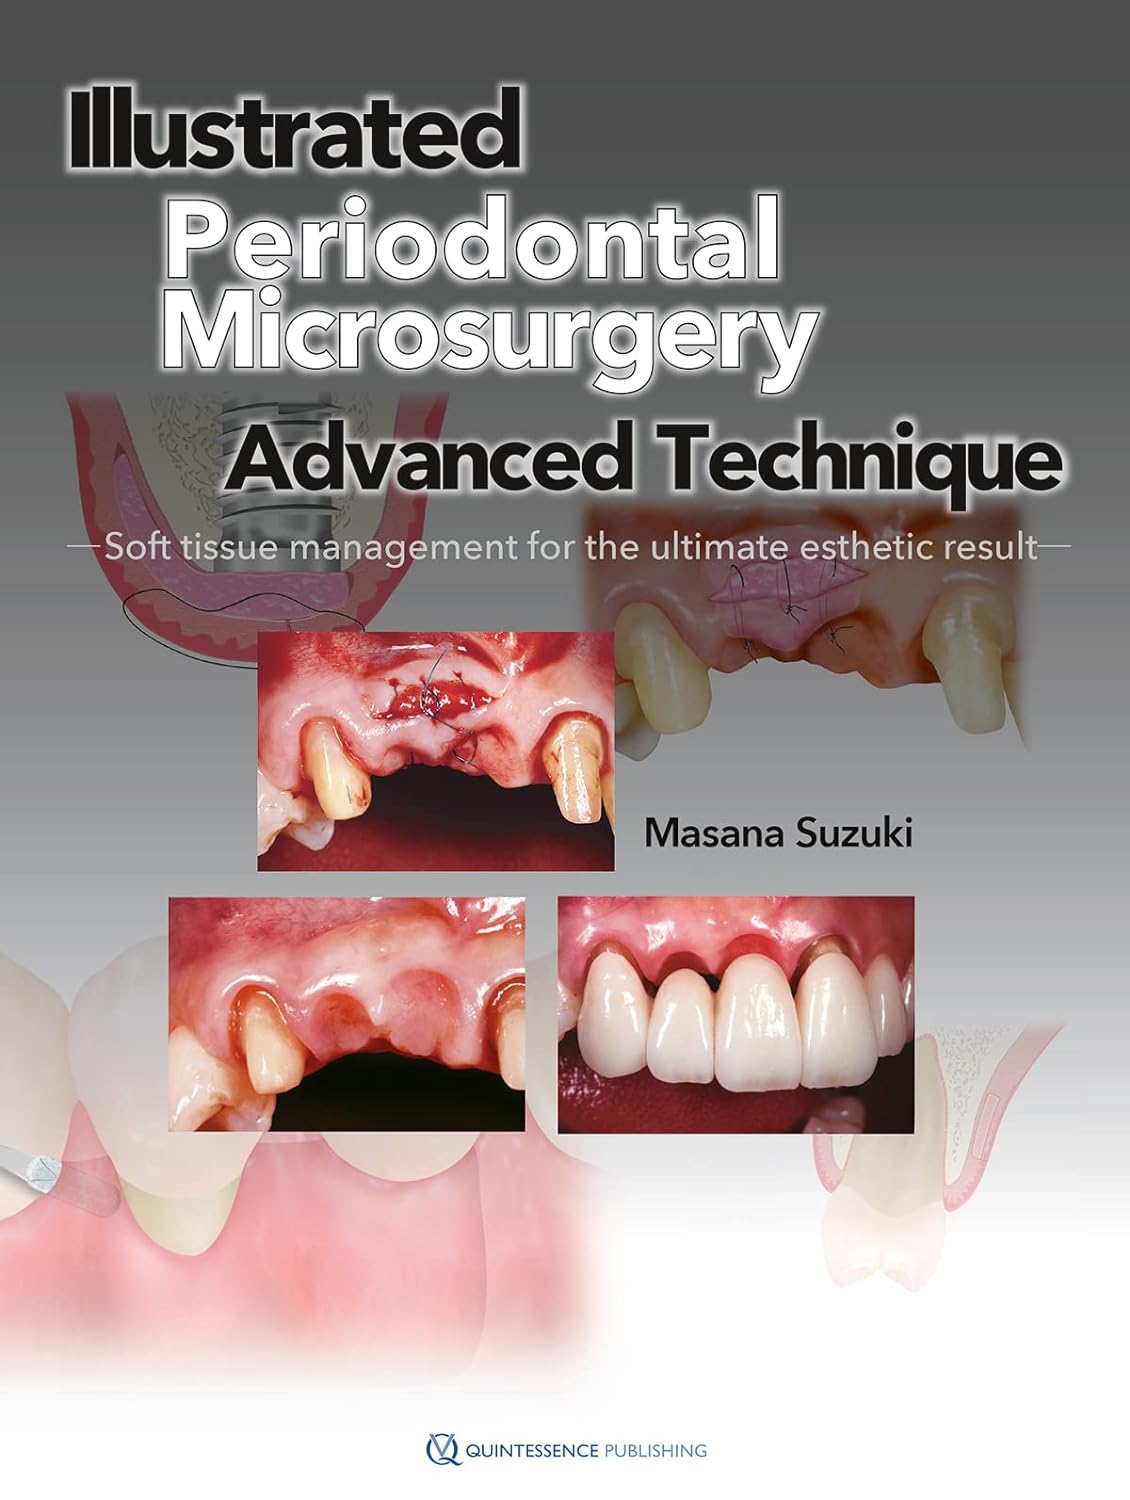 Illustrated advanced technique of periodontal microsurgery: soft tissue management for the ultimate esthetic result